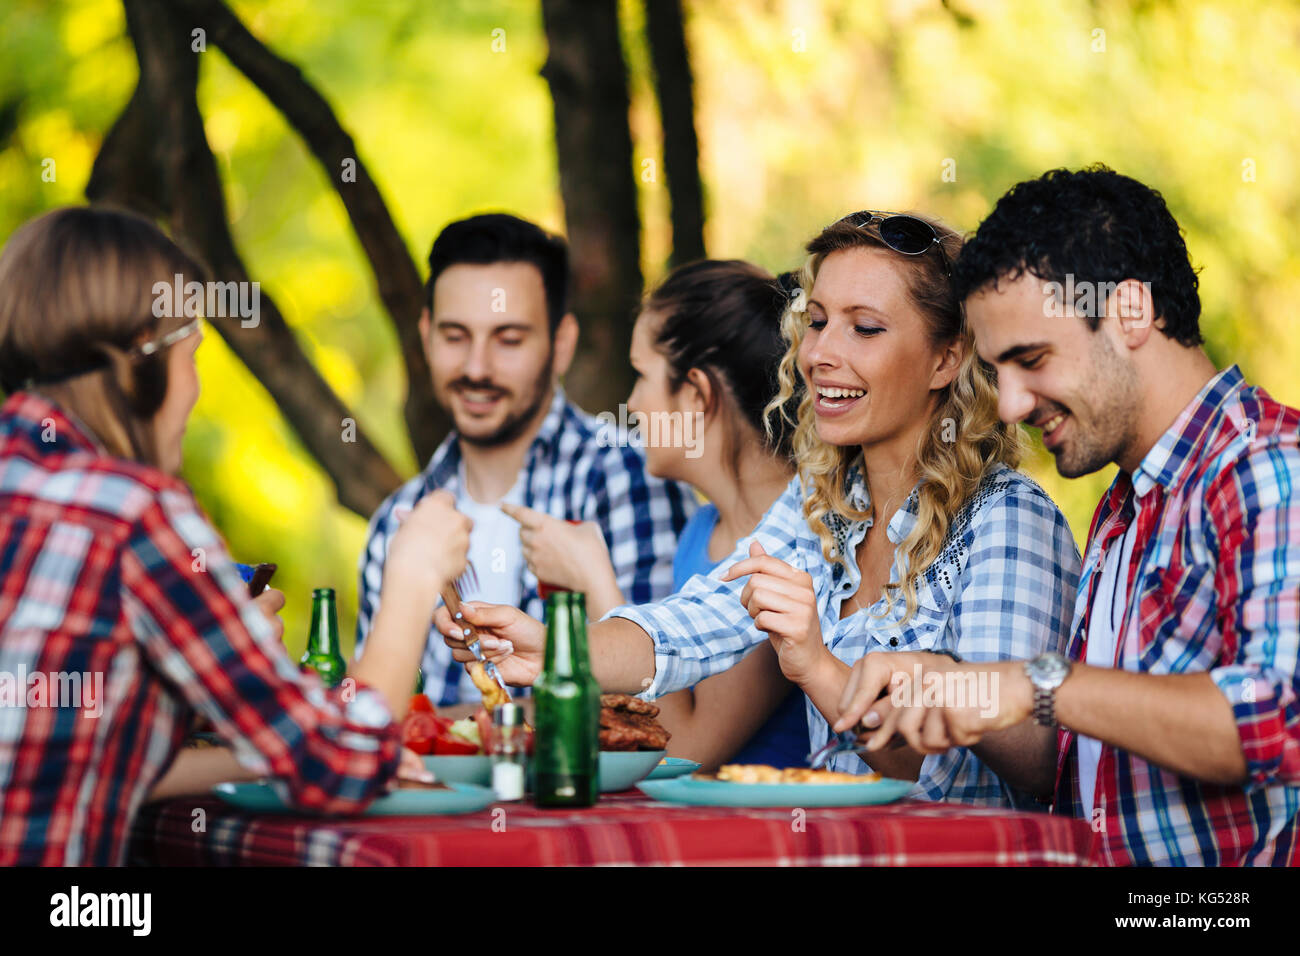 Group of happy people eating food outdoors Stock Photo